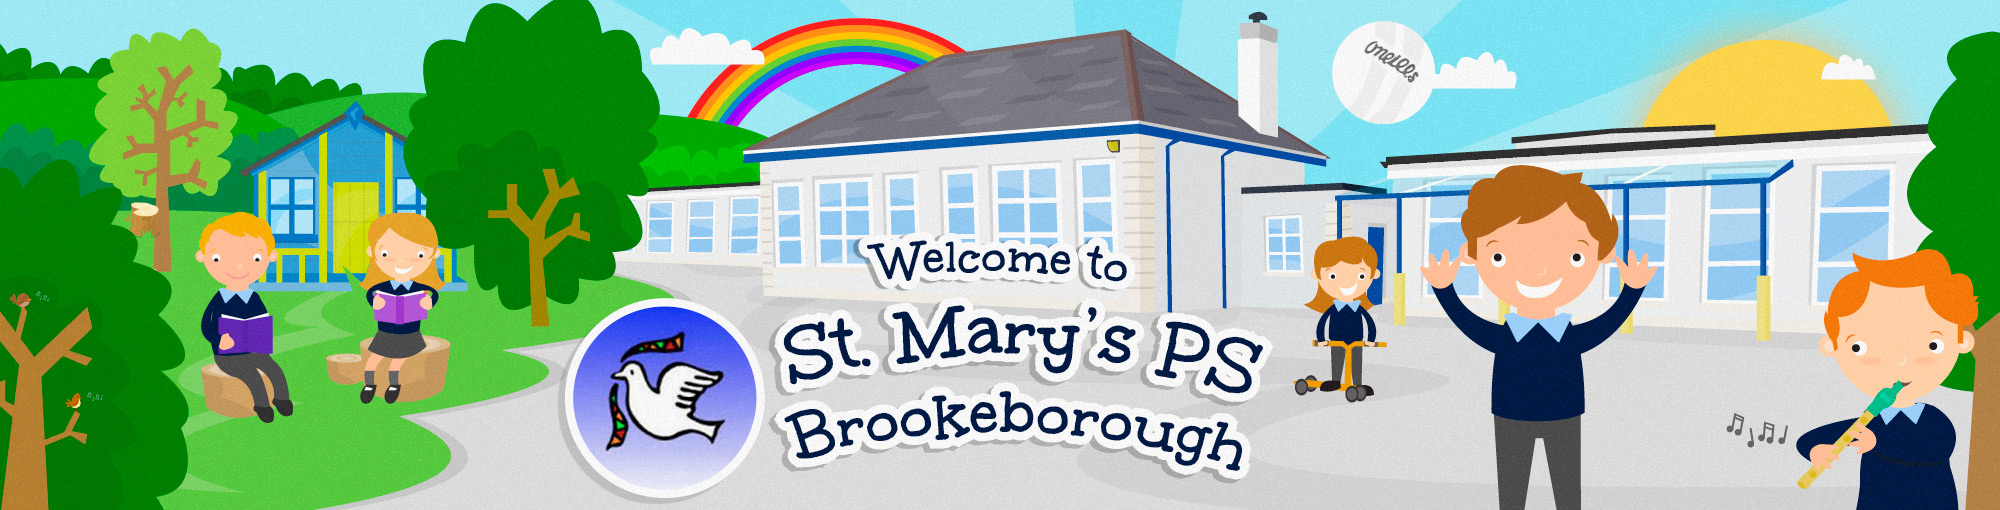 St Mary's Primary School, Brookeborough, Co. Fermanagh